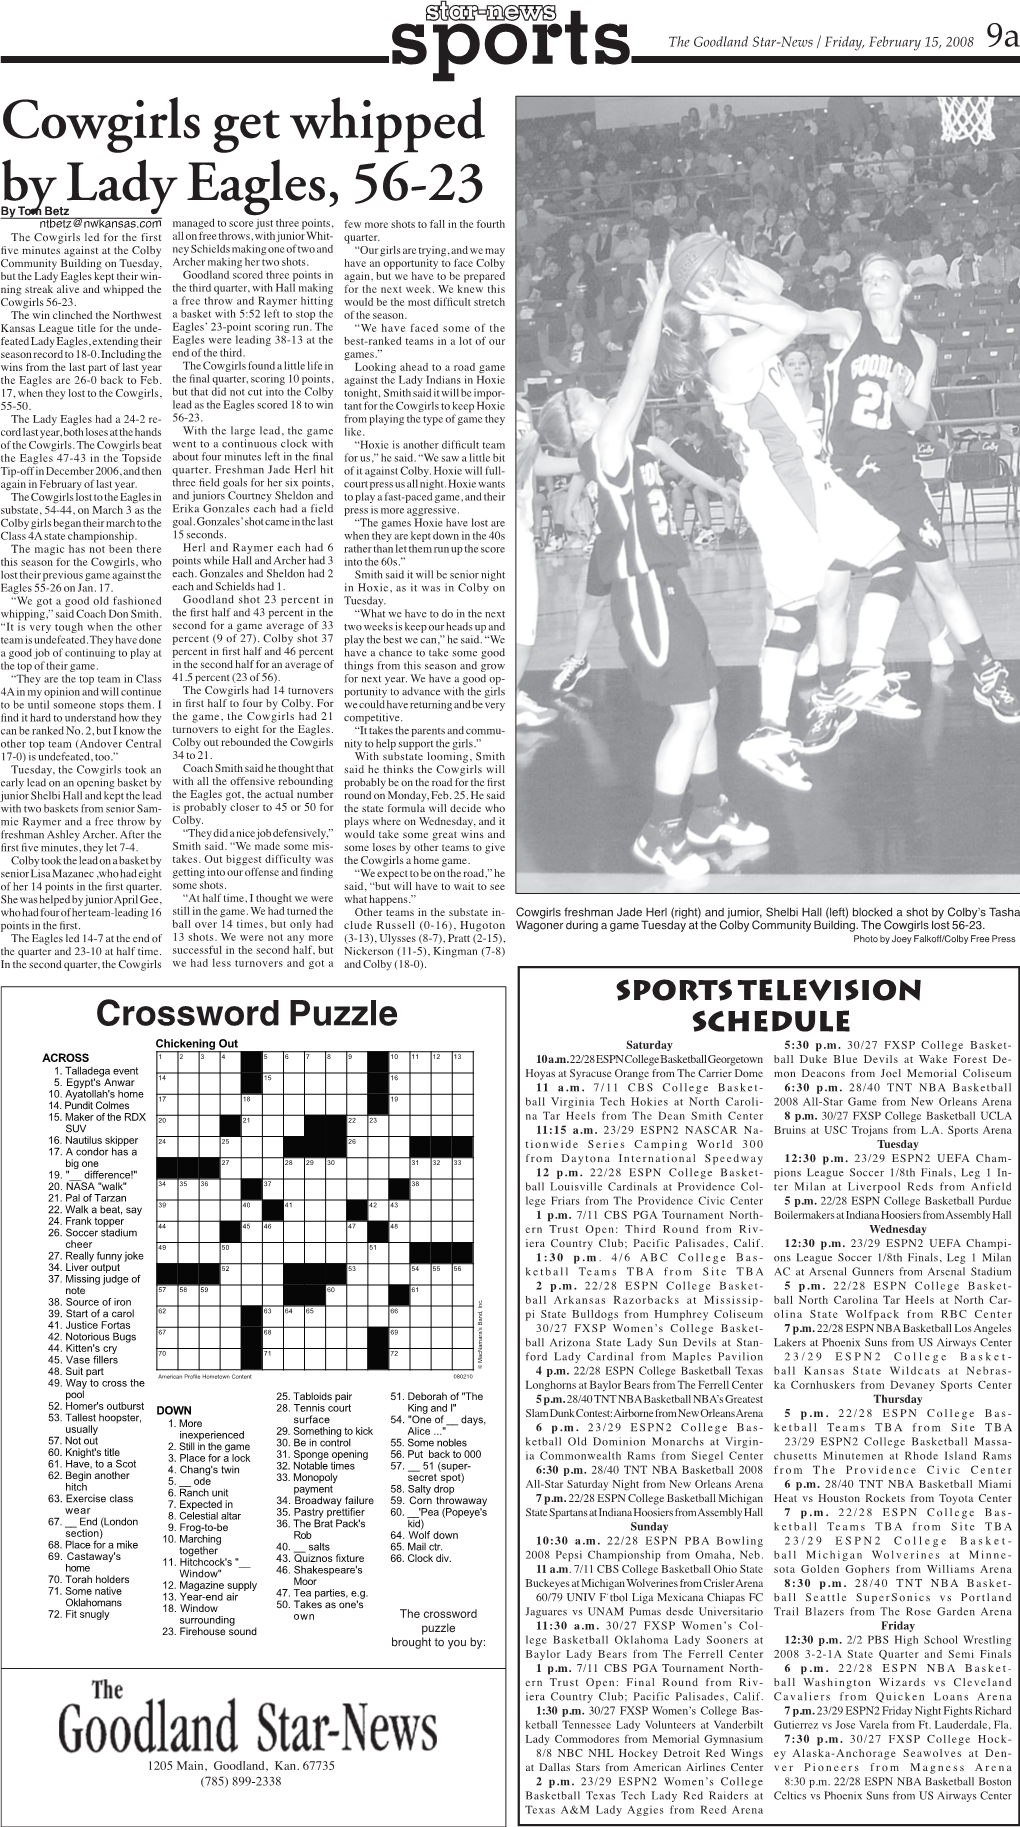 Sports Pg 9A 2/15.Indd